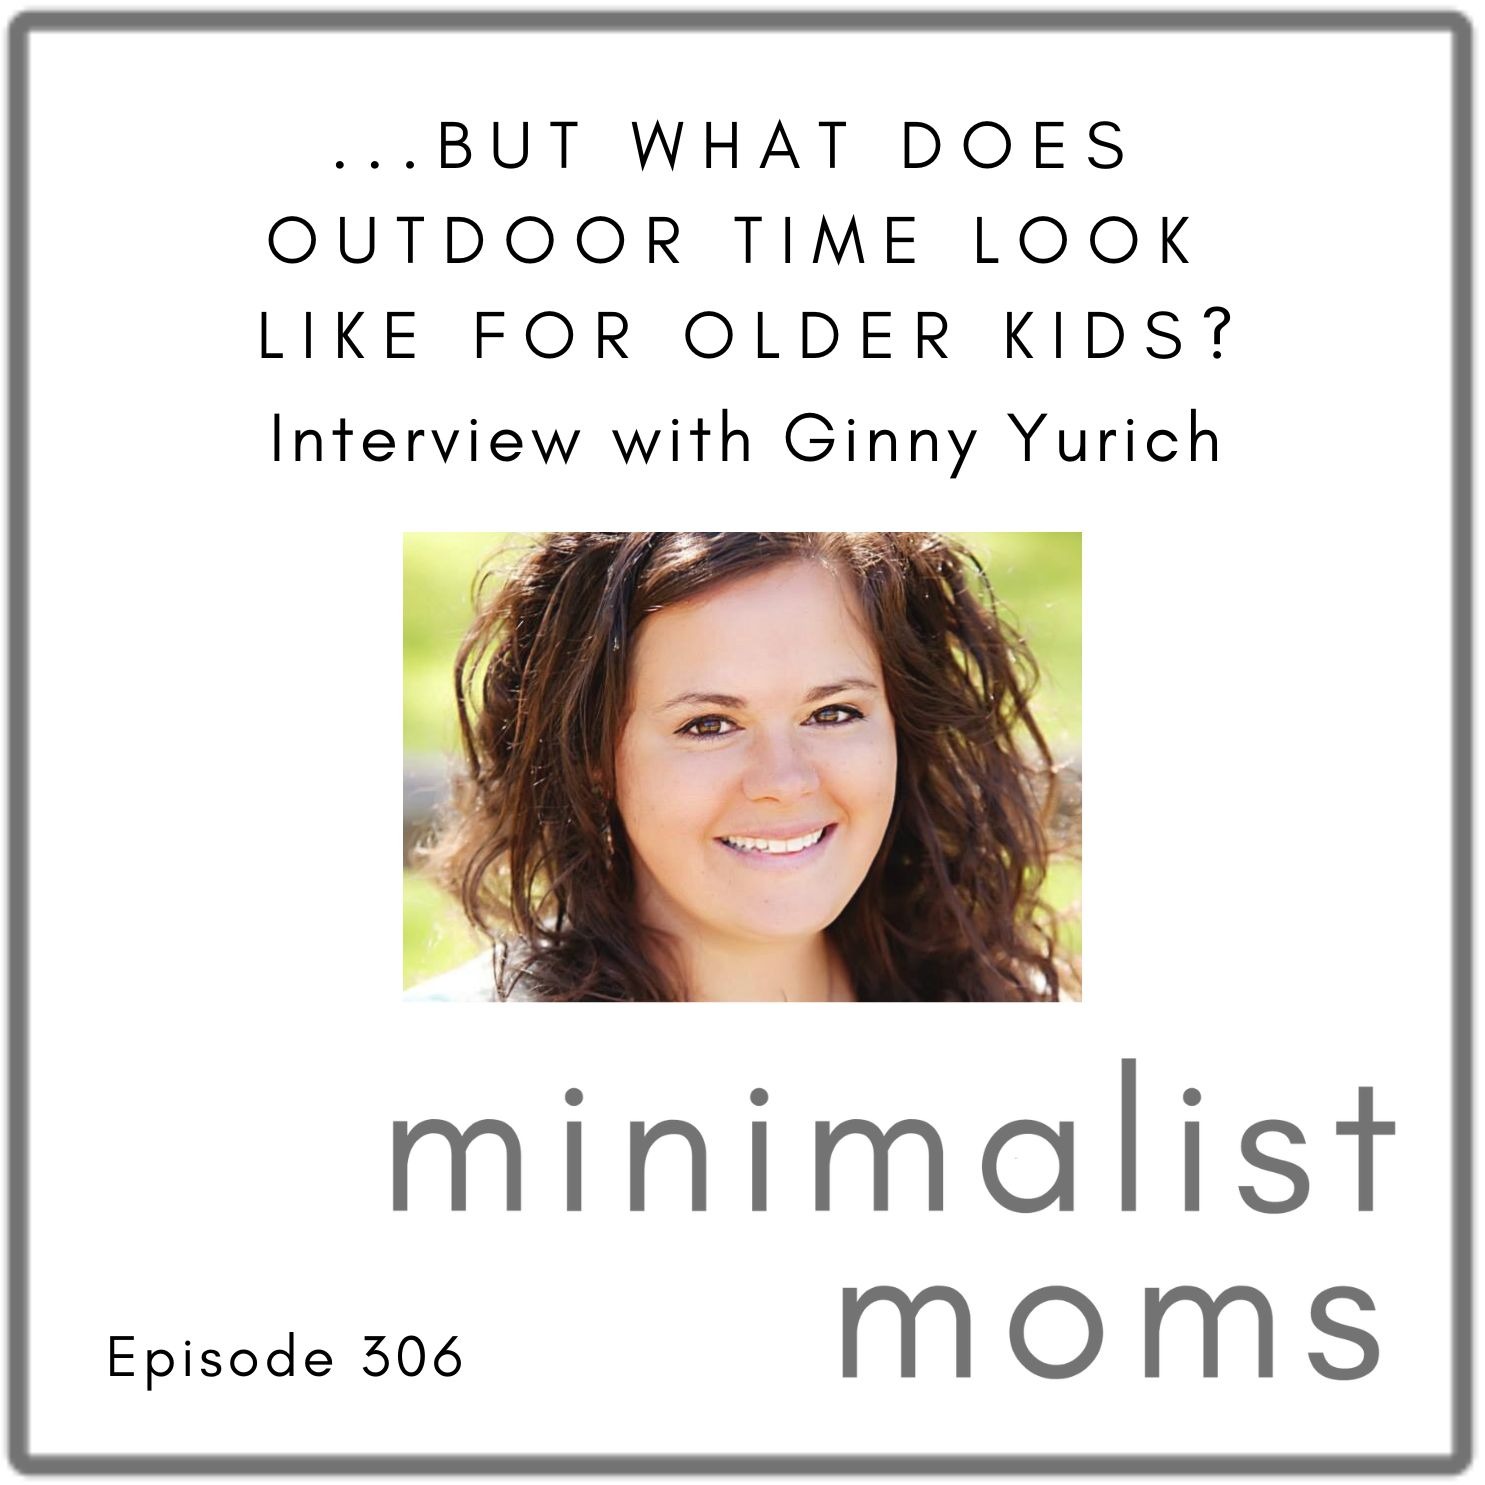 "...But What Does Outdoor Time Look Like for the Older Kids?" with Ginny Yurich (EP306)